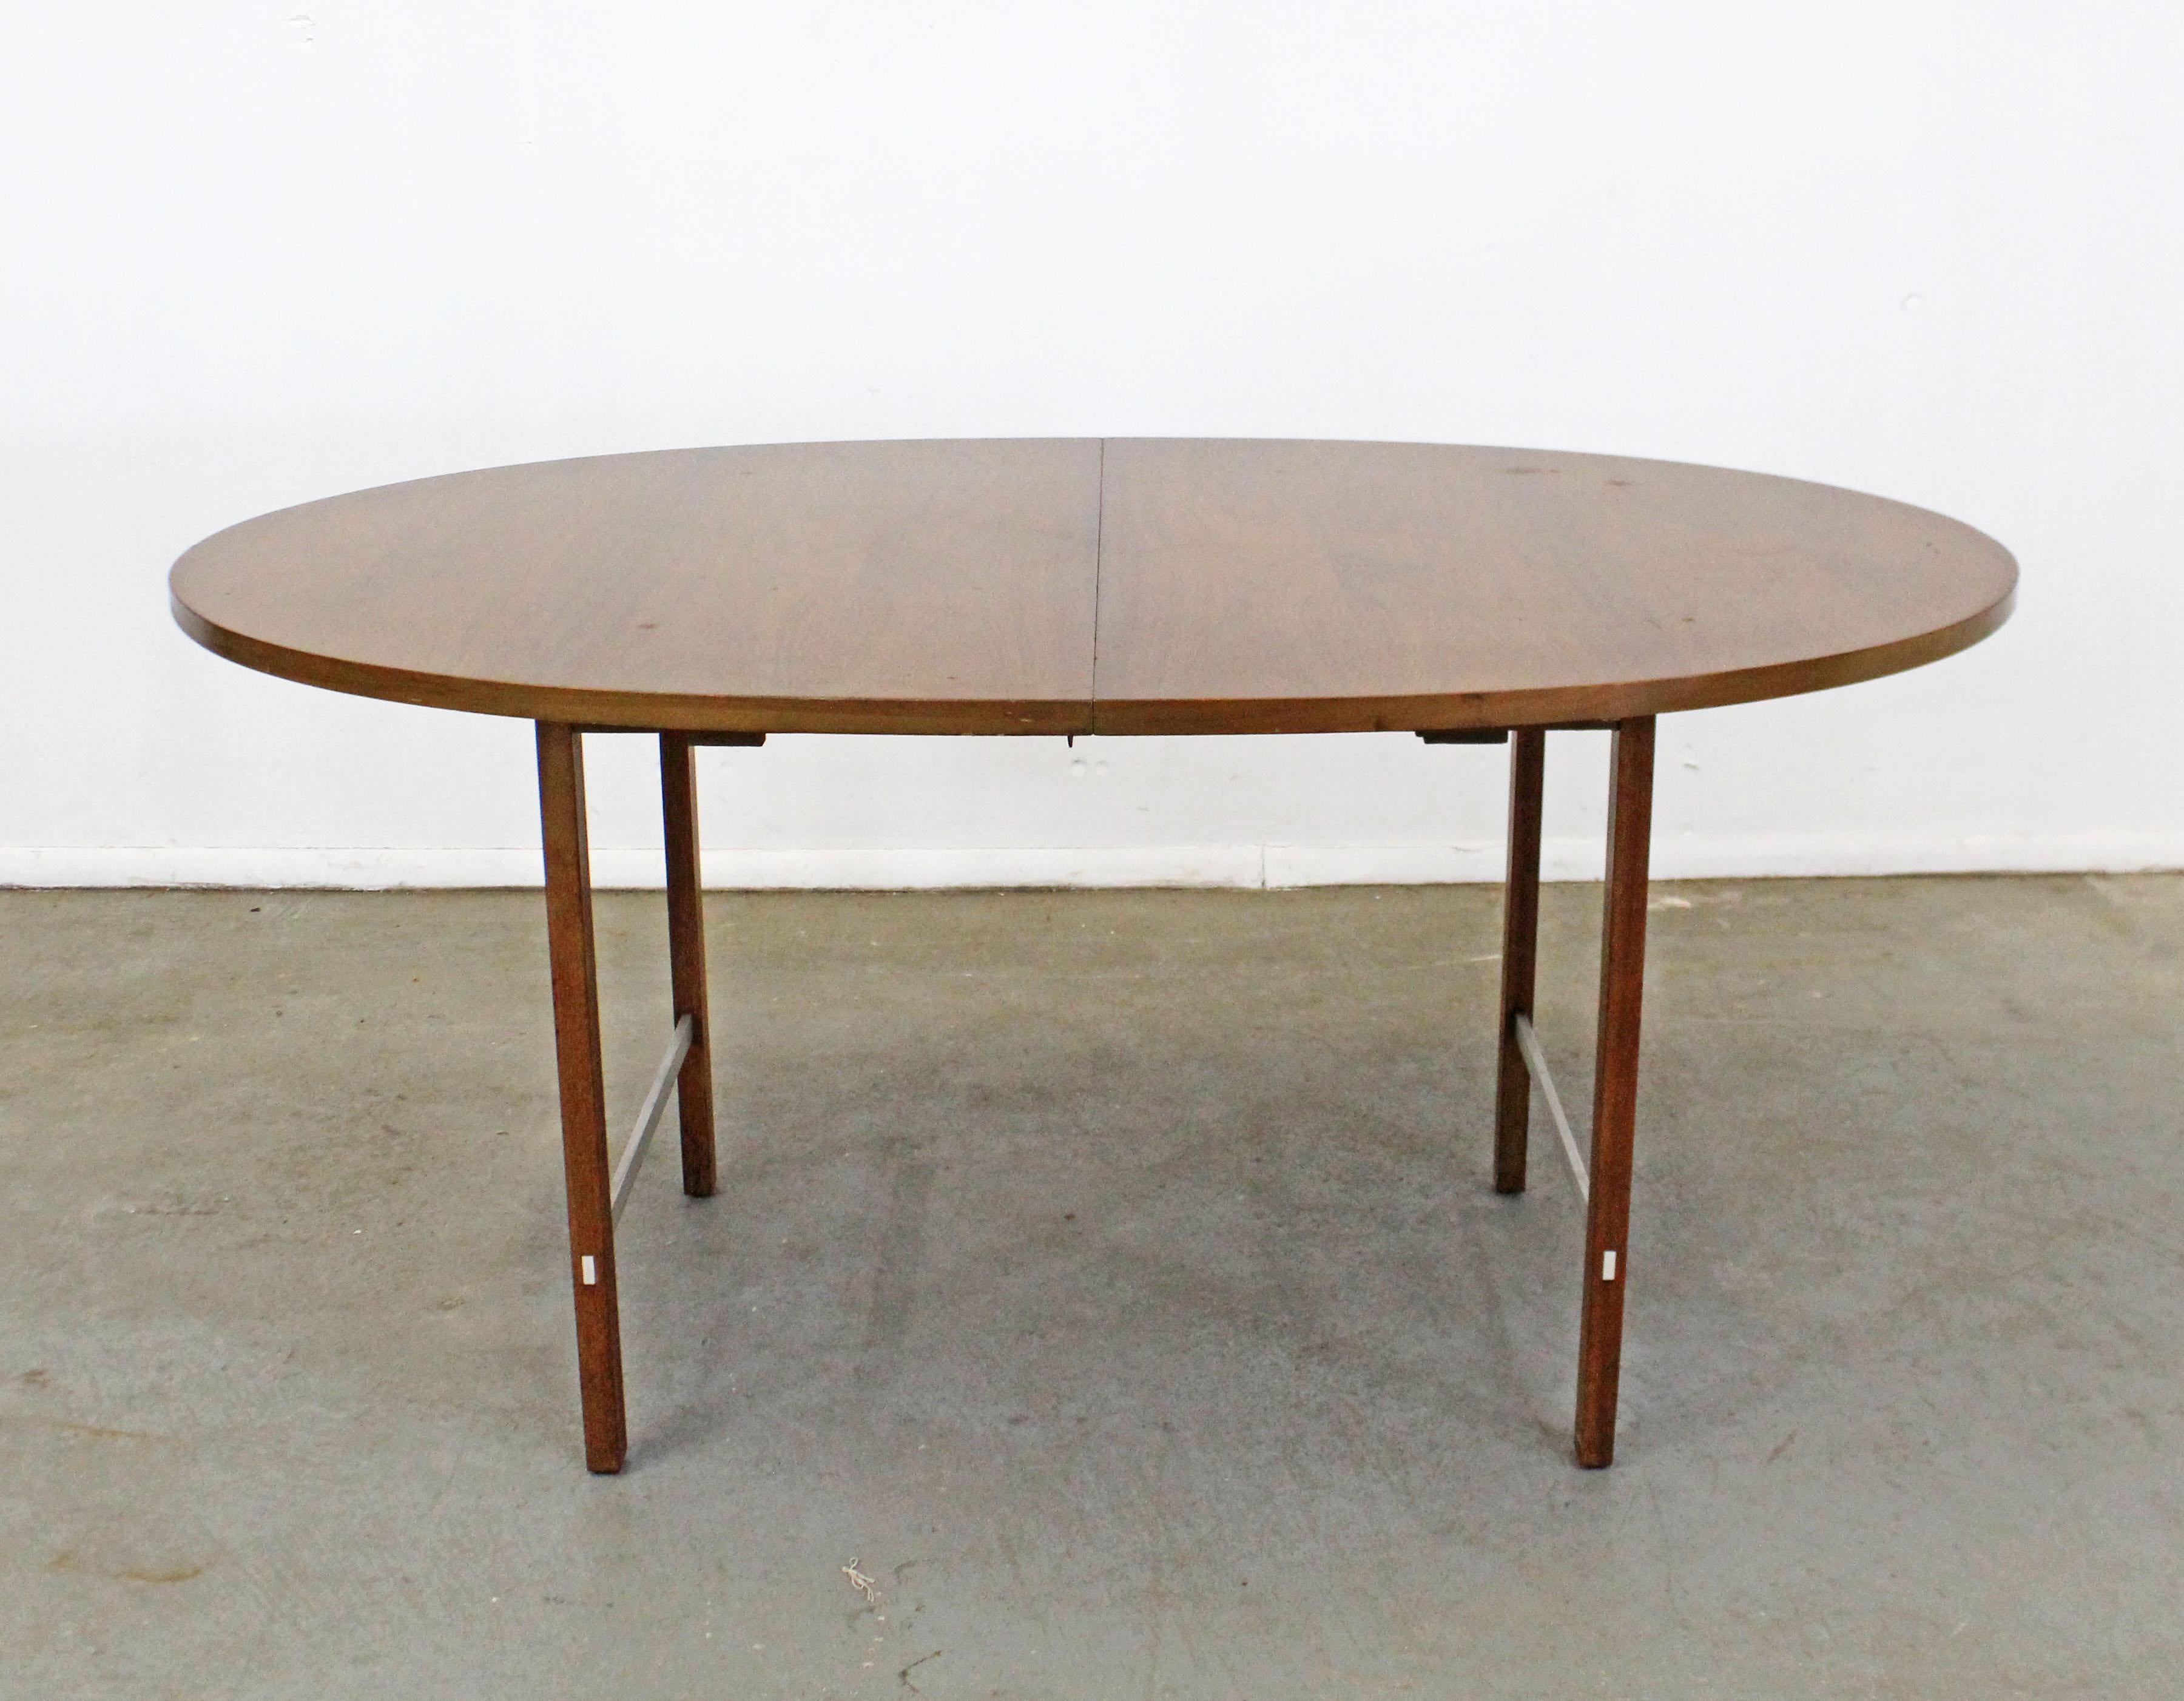 Offered is a vintage Mid-Century Modern dining table, designed by Paul McCobb for the Irwin Collection by Calvin. The table is made of walnut featuring an ovular tabletop with aluminum braces on the legs. It is in vintage condition showing normal